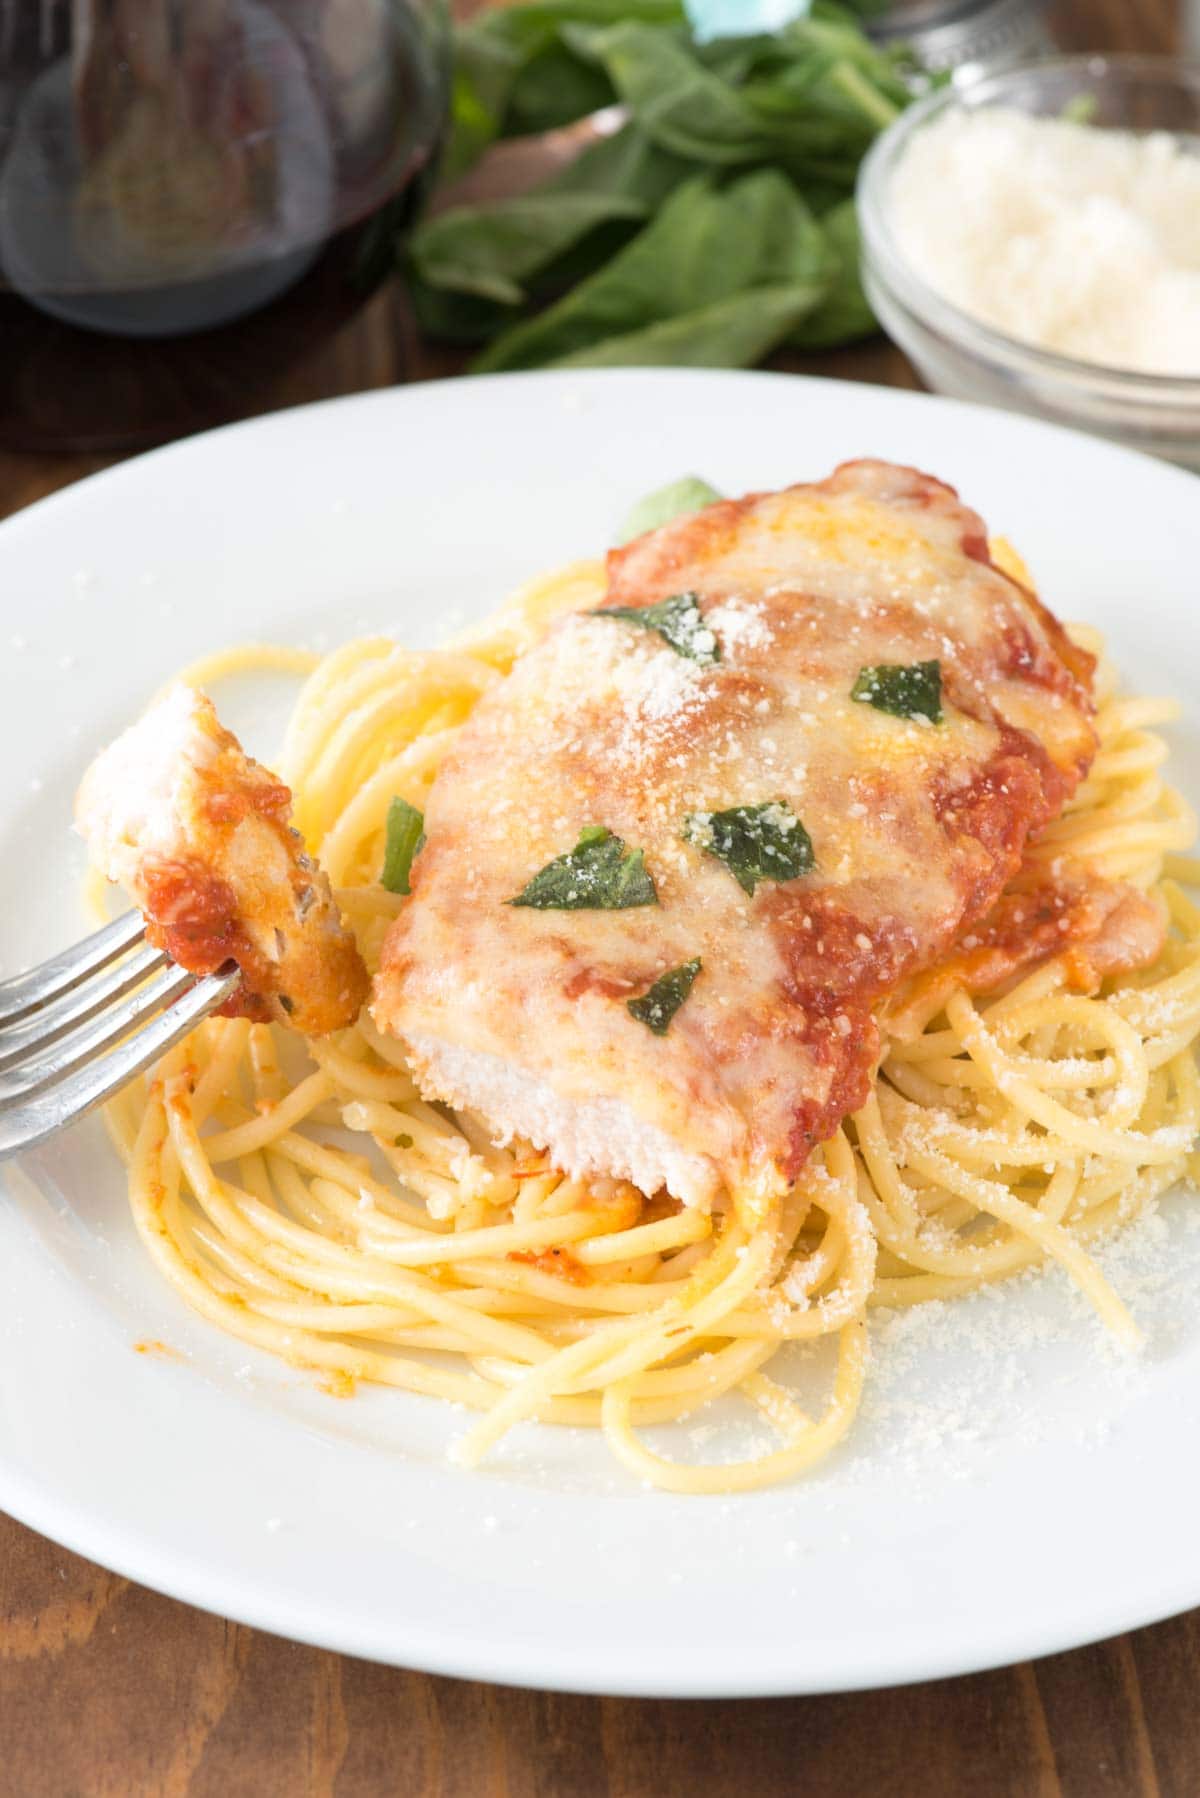 Easy Chicken Parmesan - this quick dinner recipe is totally foolproof. The chicken comes out moist every time! It's the BEST chicken parmesan recipe we've ever had.